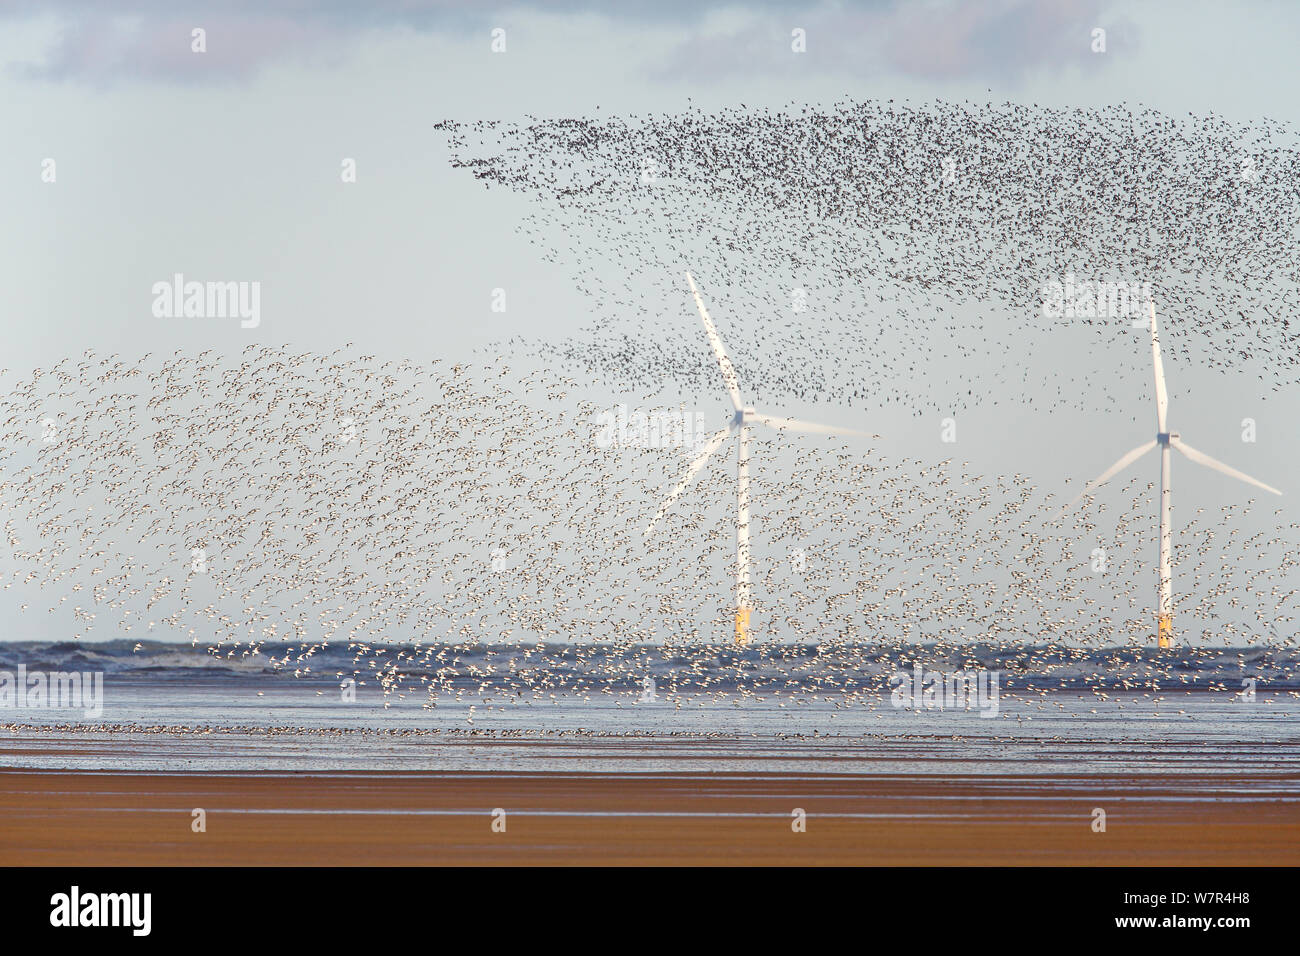 Knot (Calidris canutus) flocks in flight over Liverpool Bay with wind turbine in the background Liverpool Bay, UK, November Stock Photo